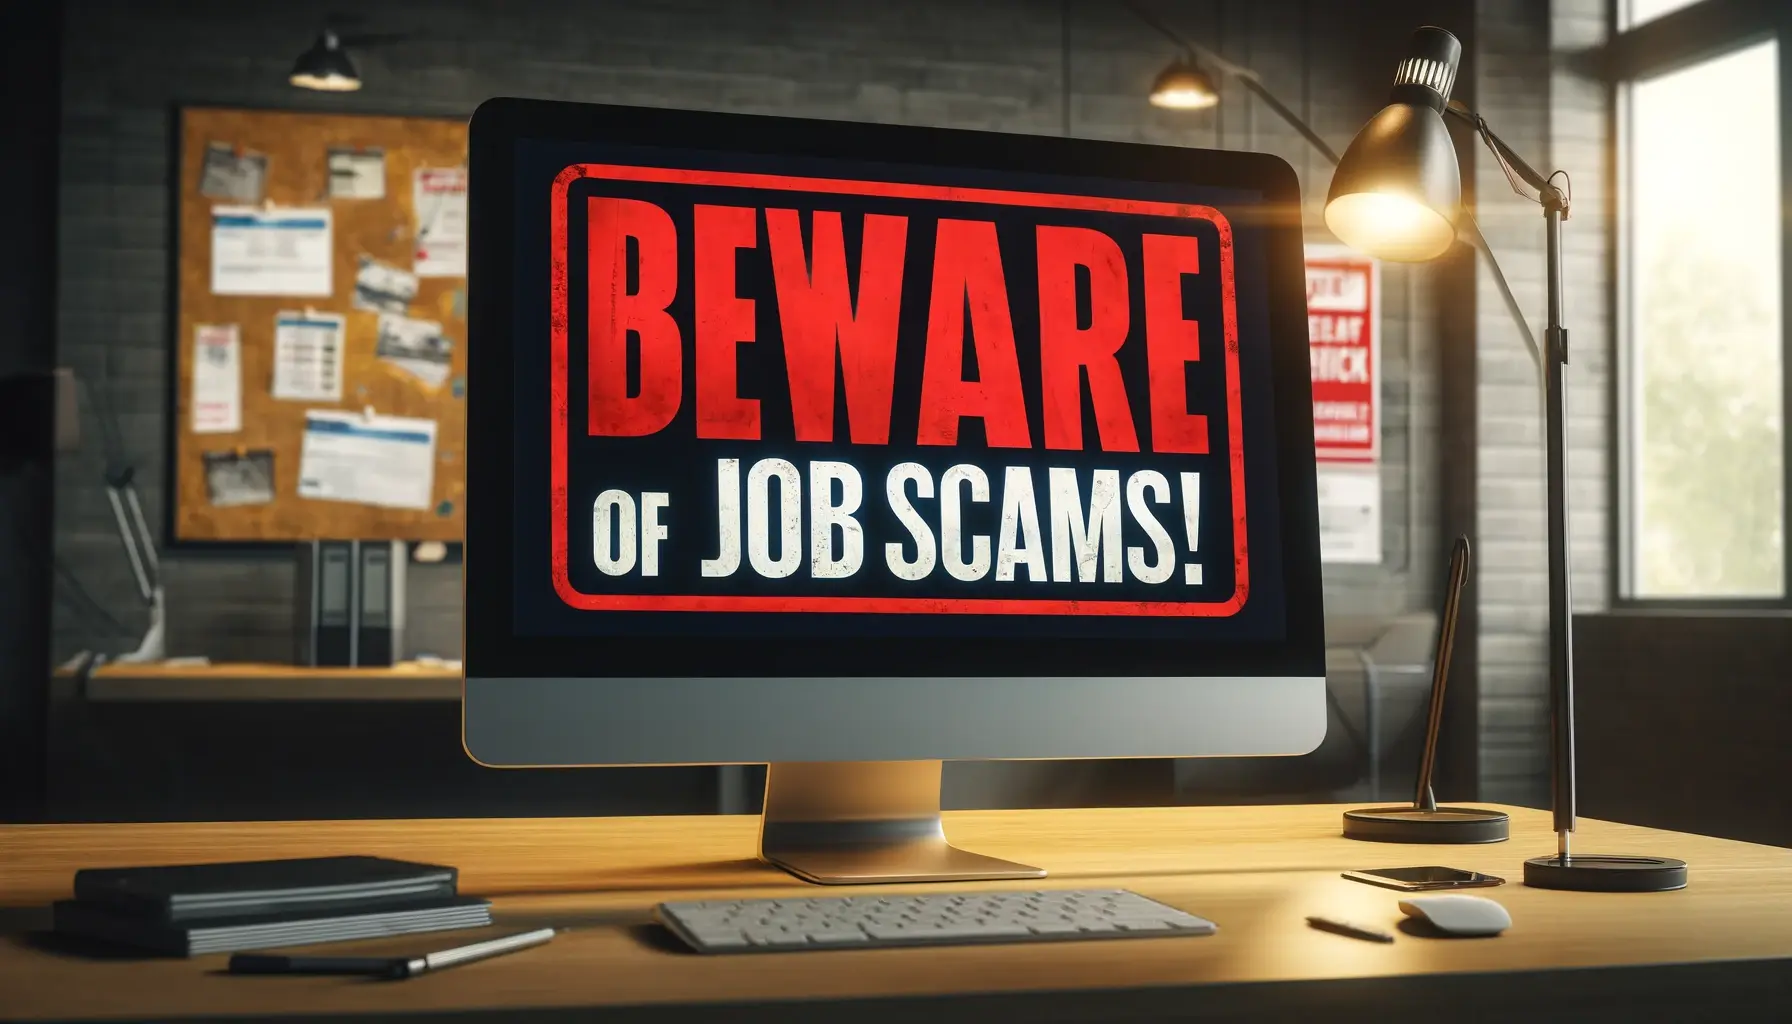 Important Announcement: Beware of Job Scams!